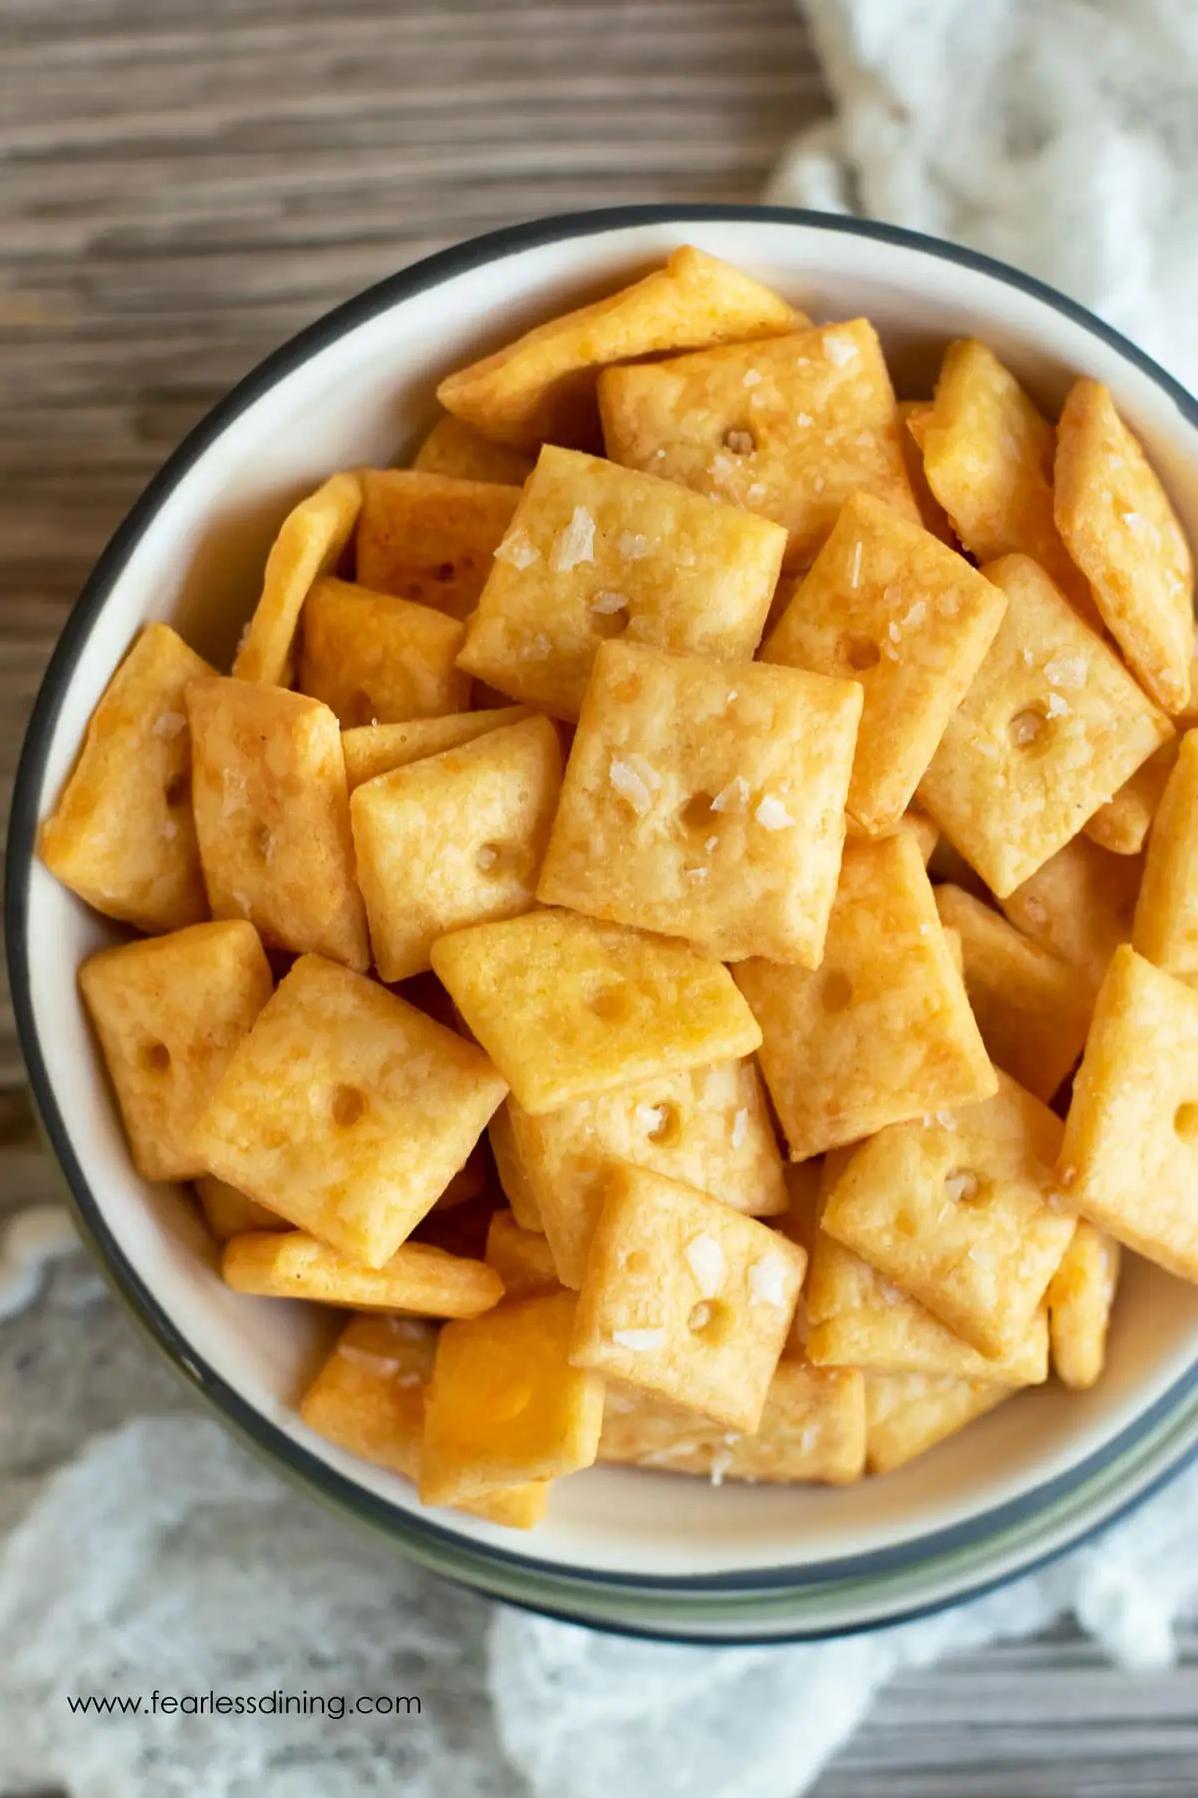  Hold on to your hats, folks! Today we're making some delicious gluten-free cheese crackers!